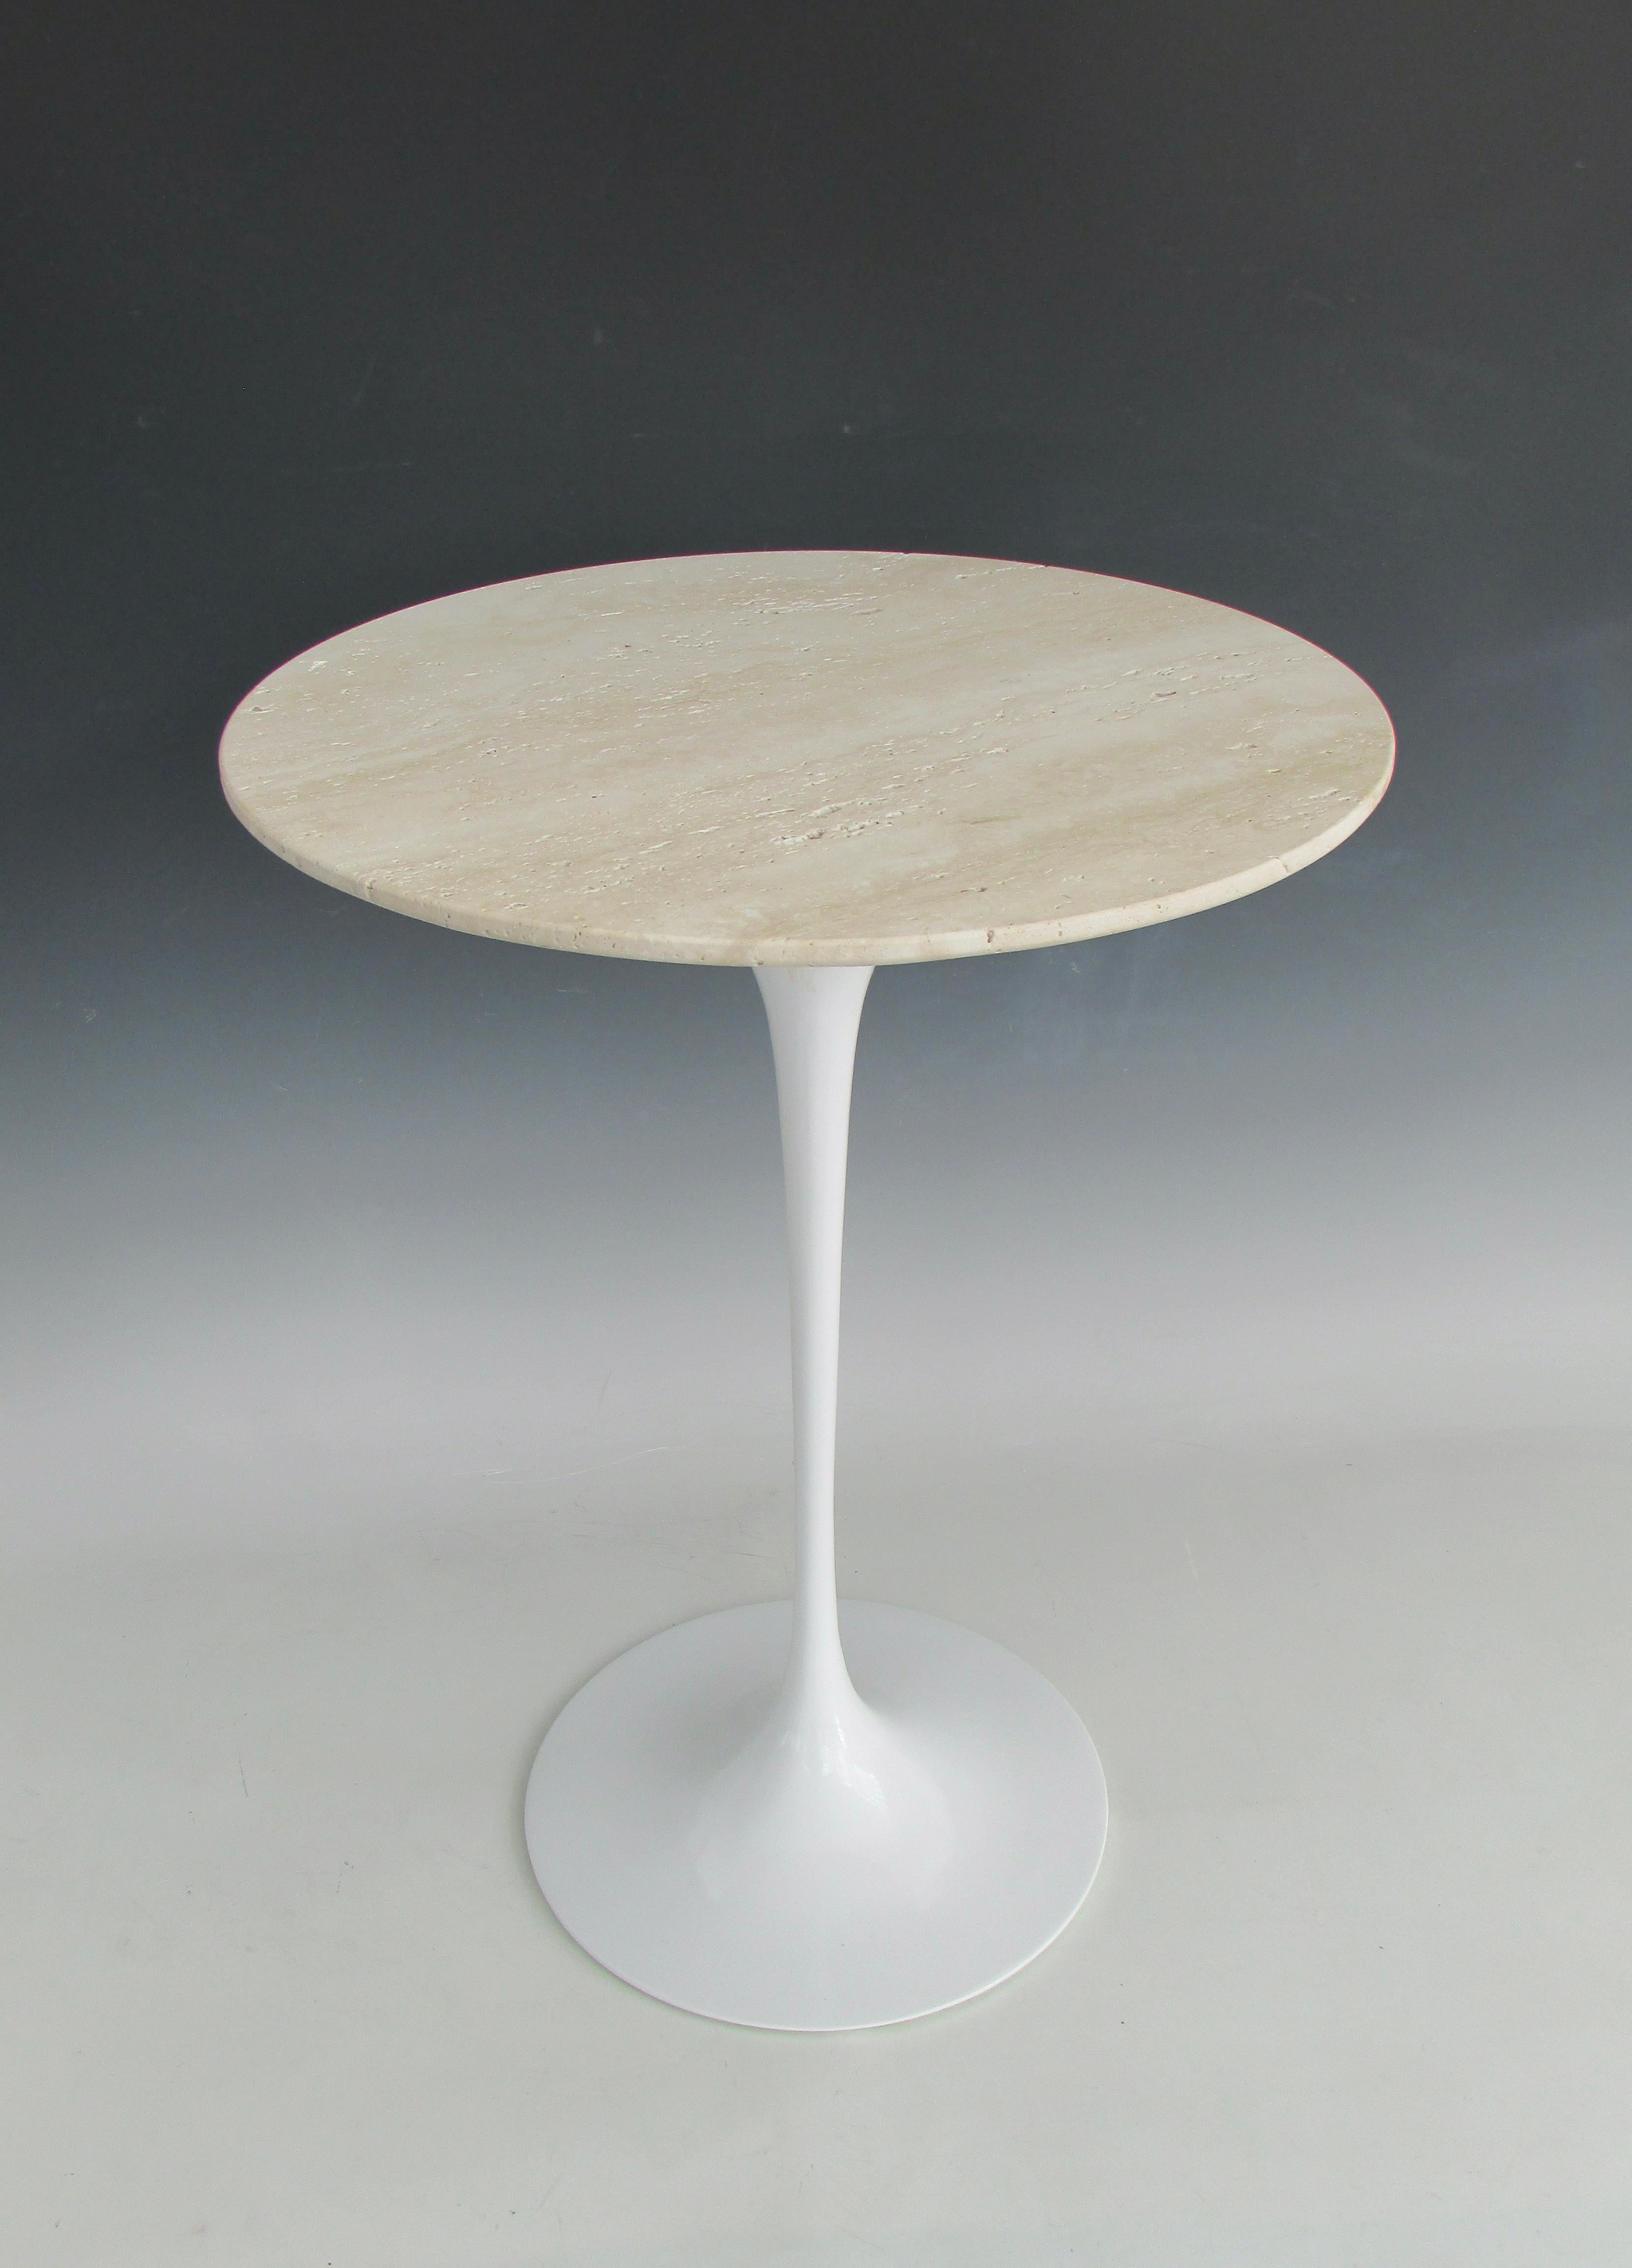 Early Eero Saarinen for Knoll Cast Iron Tulip Table with Custom Travertine Top For Sale 1